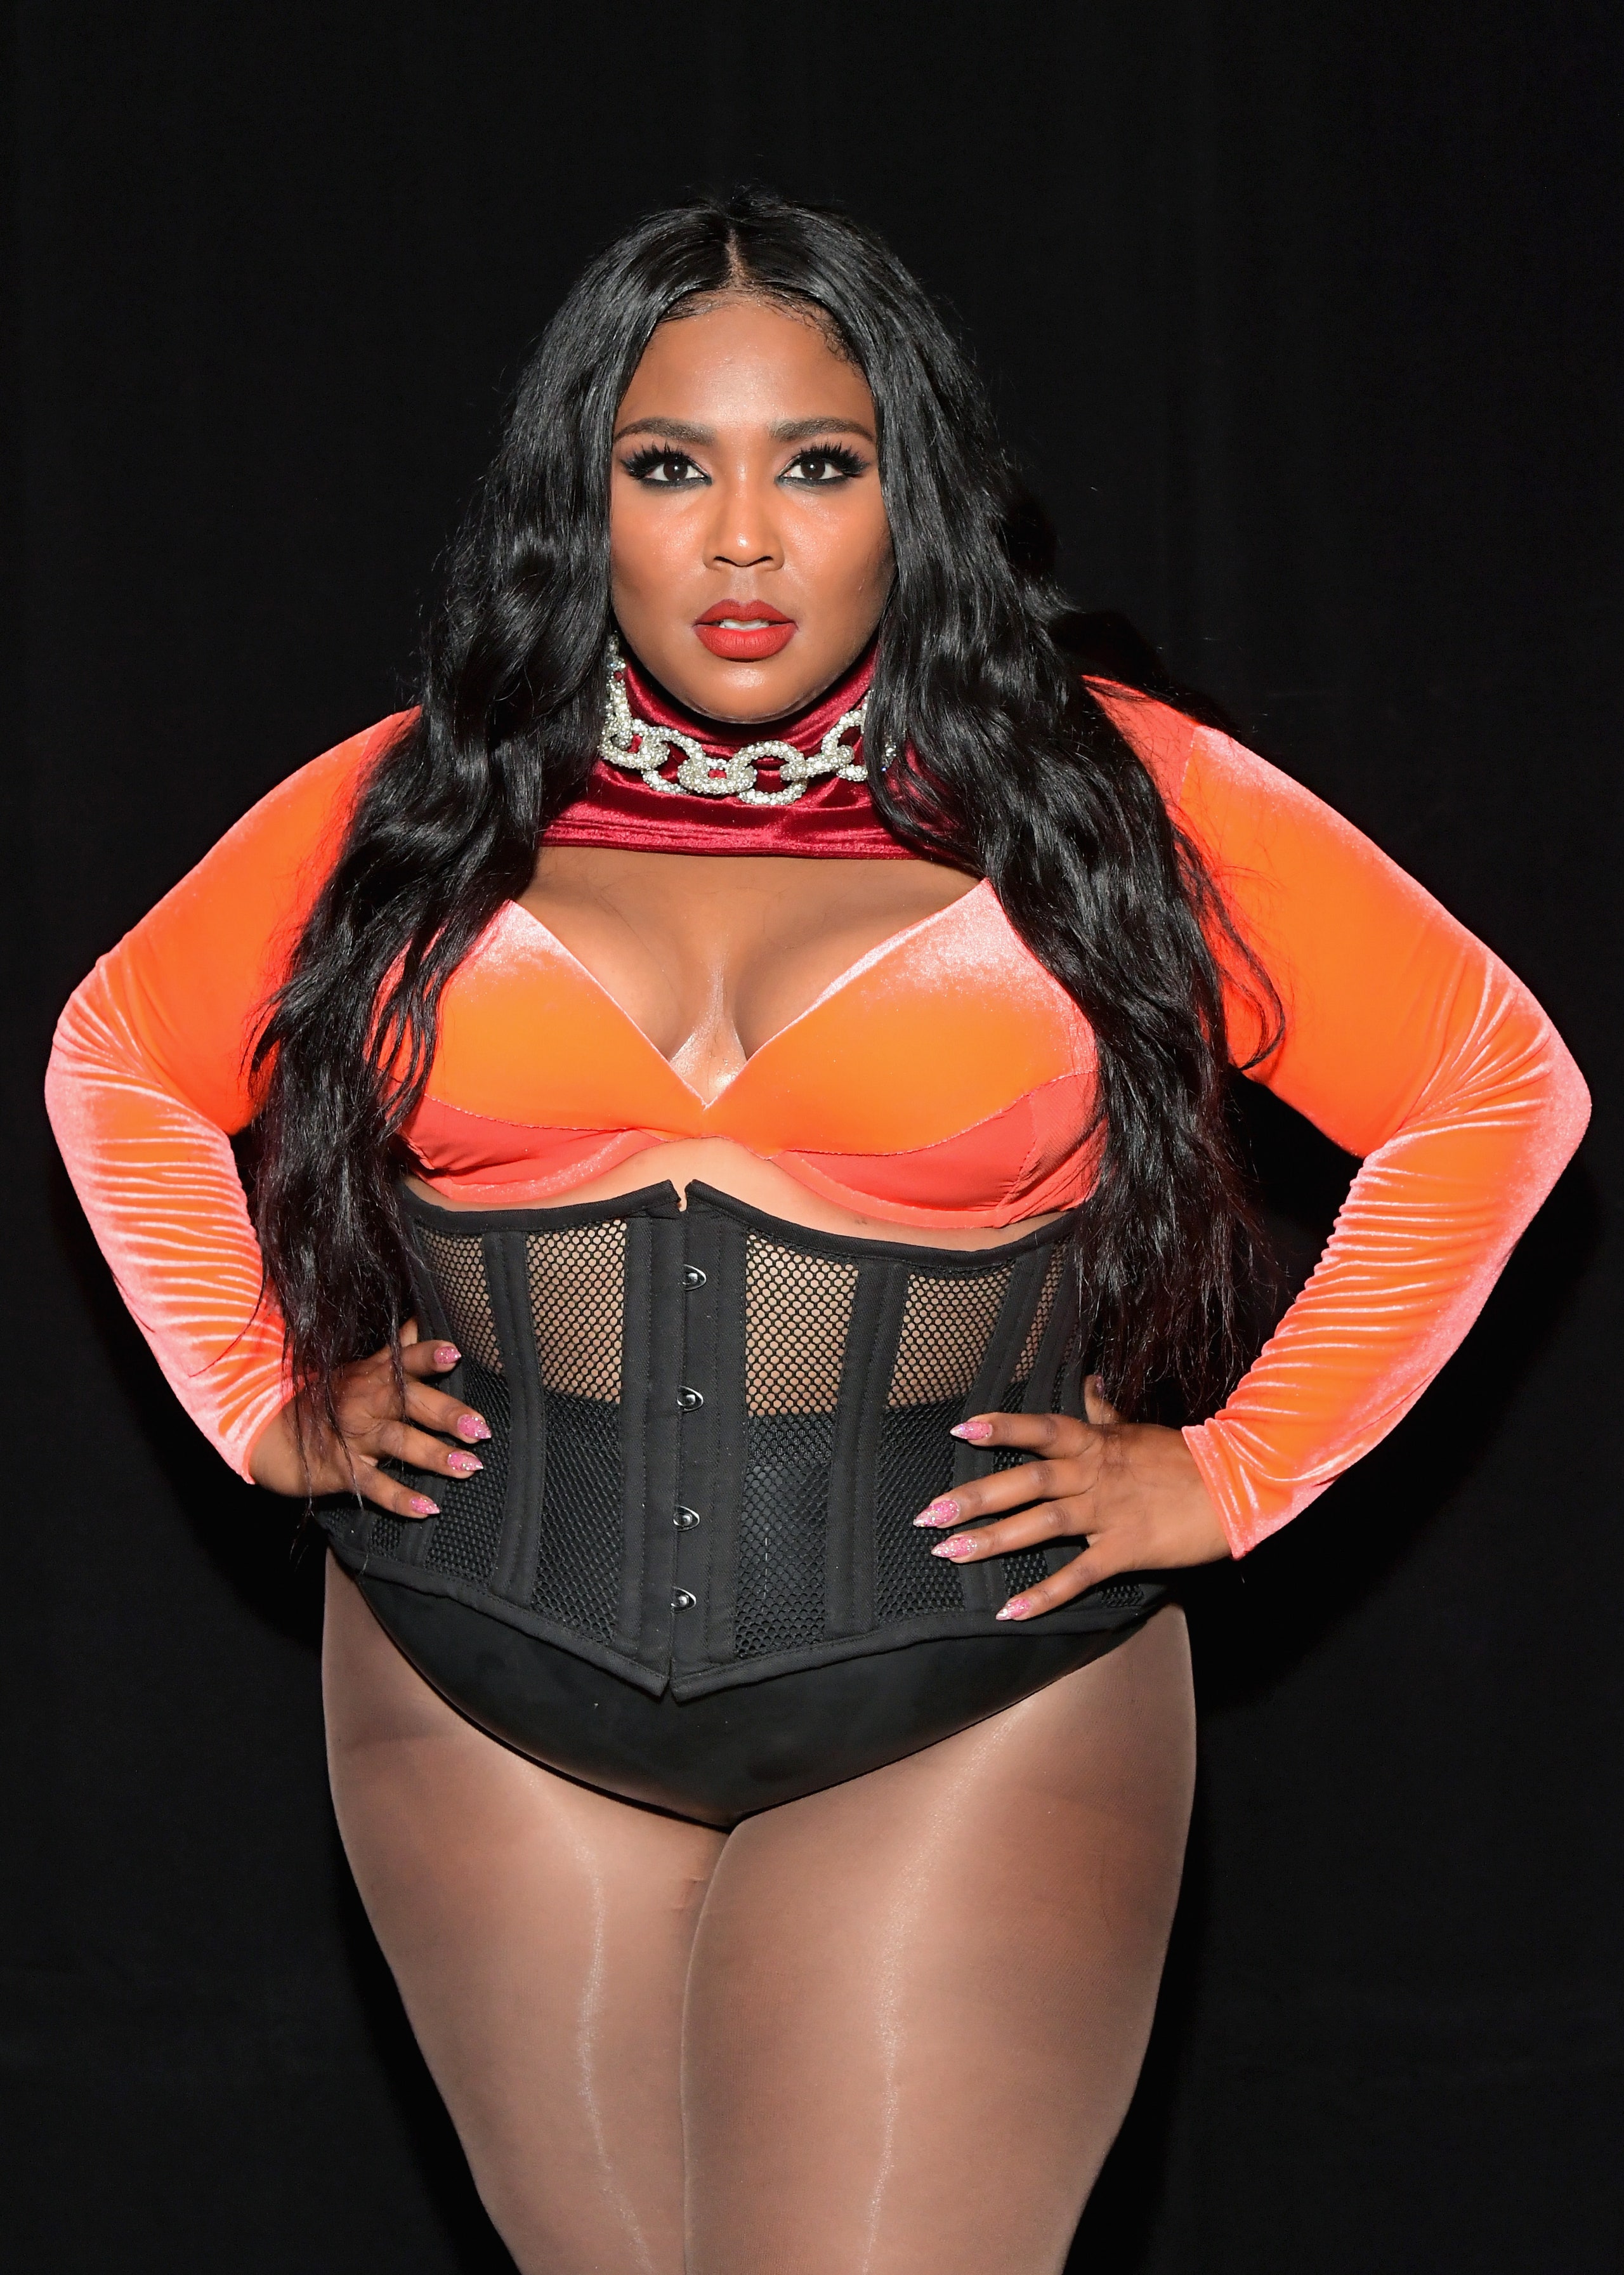 Lizzo's physical appearance